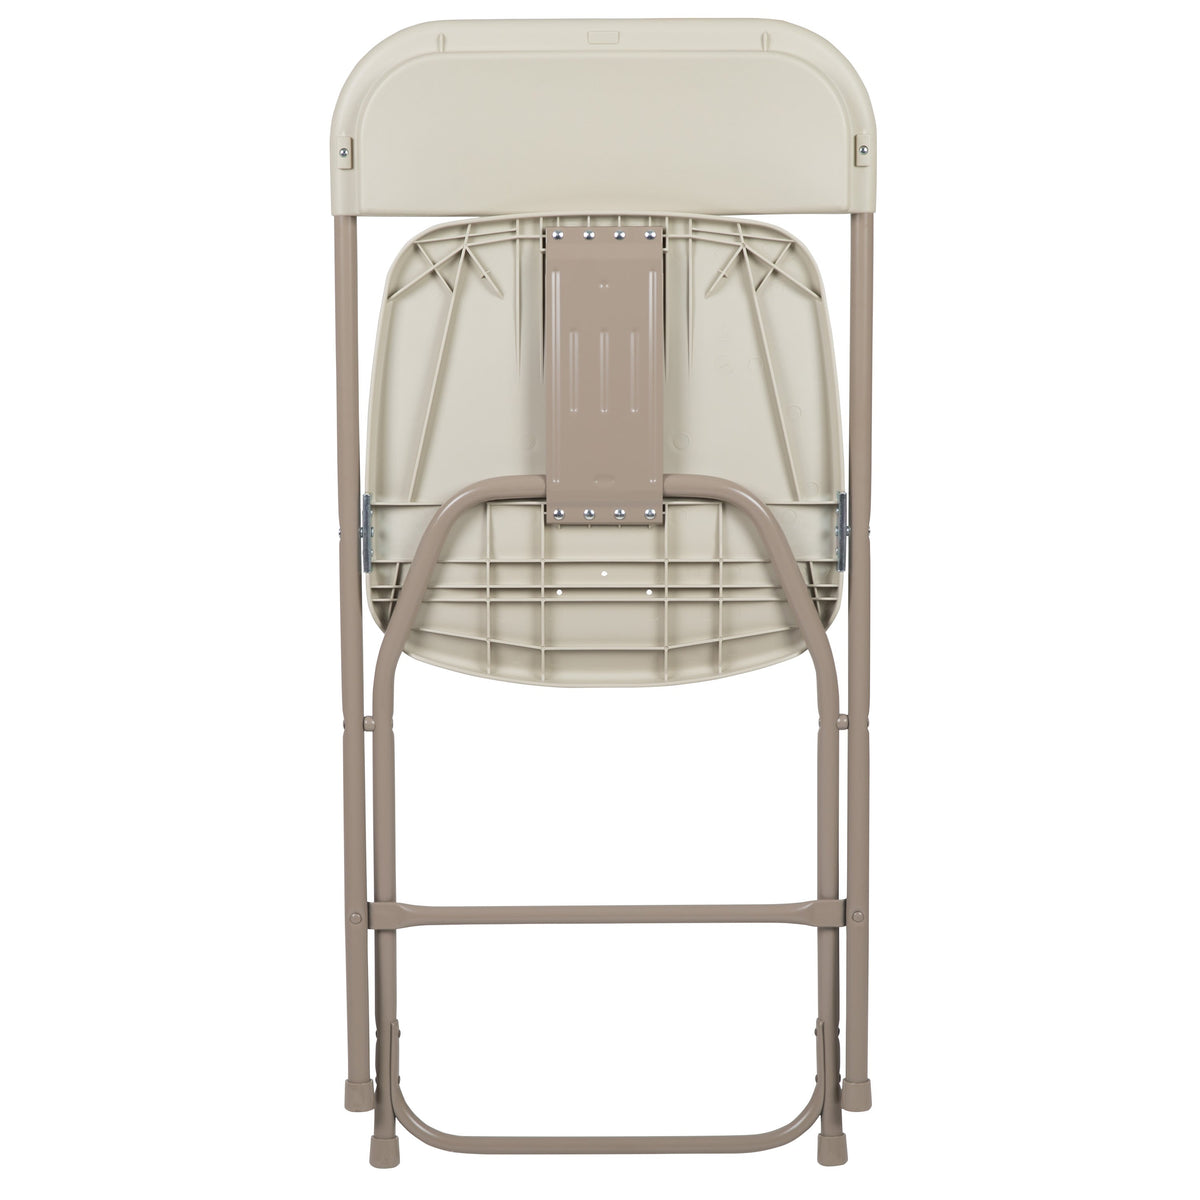 Beige |#| Folding Chair - Beige Plastic – 650LB Weight Capacity - Event Chair